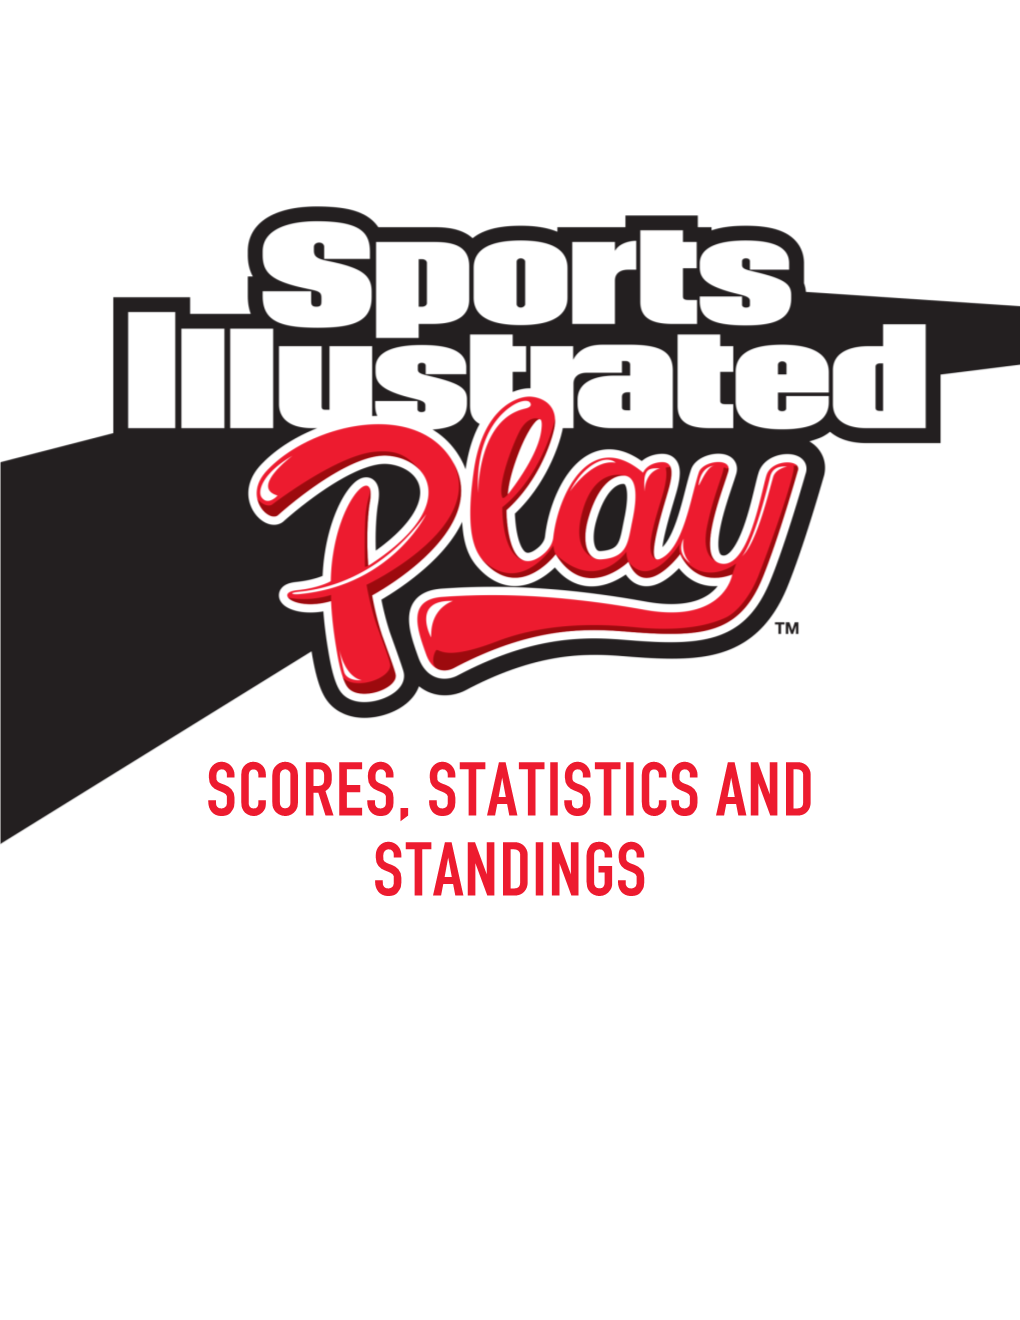 Scores, Statistics and Standings